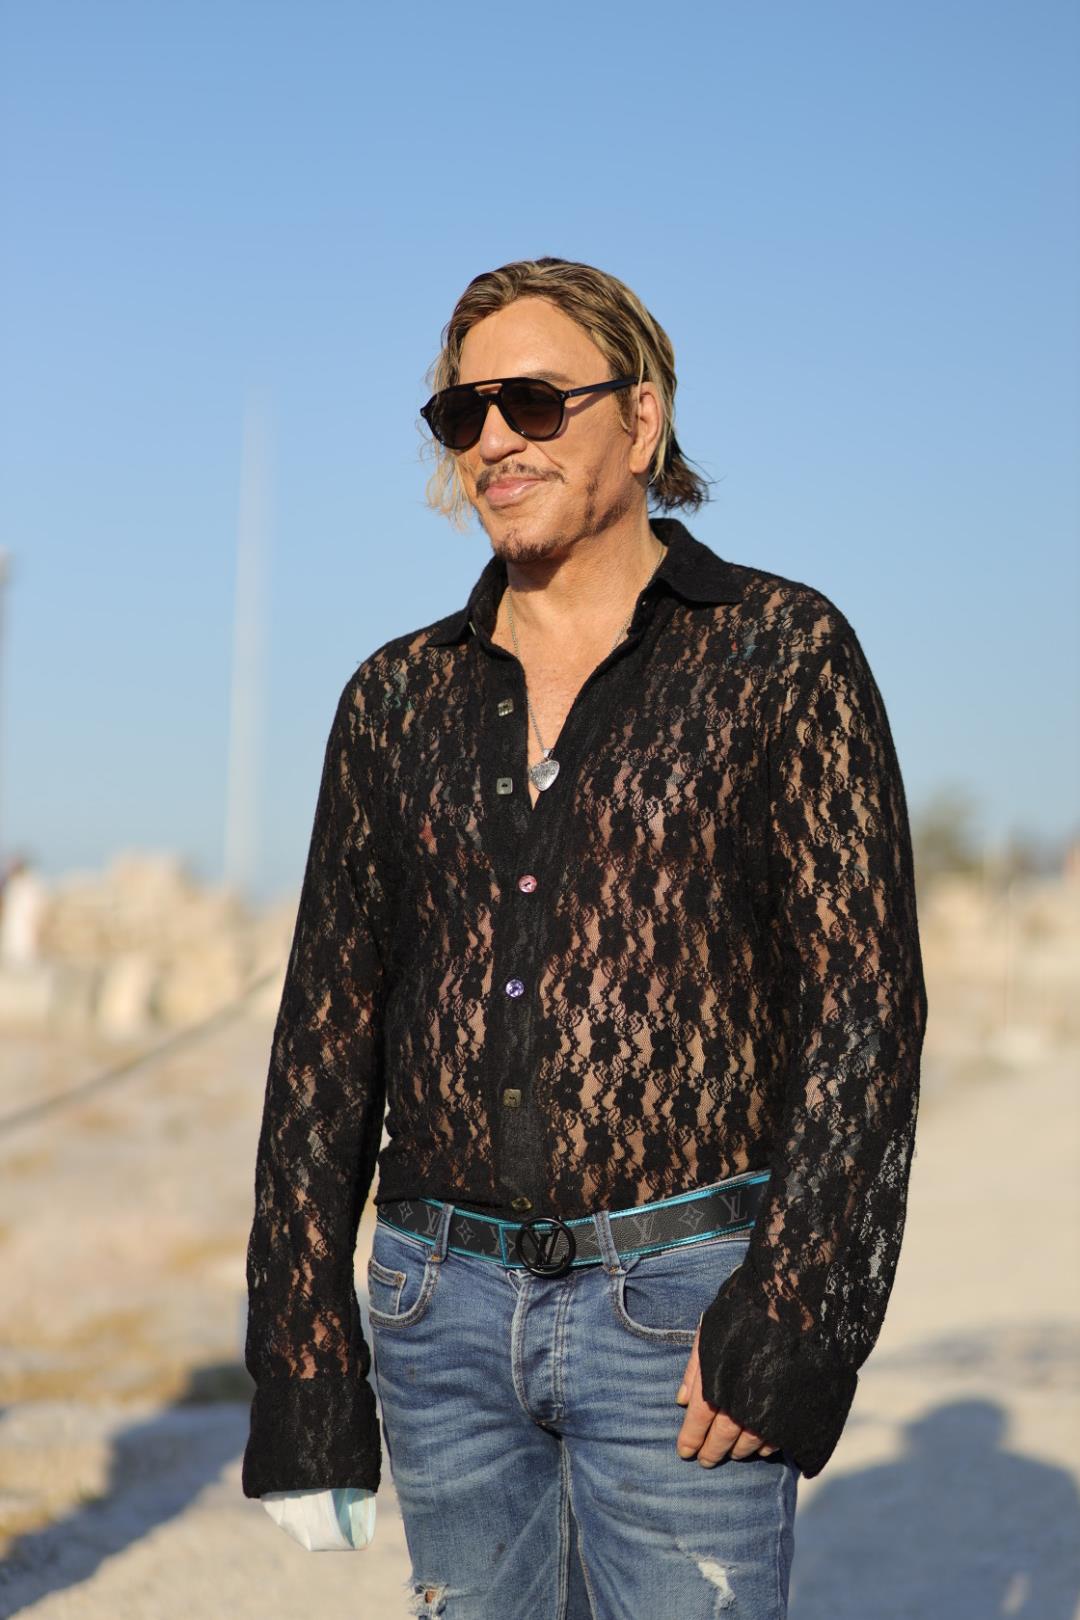 Mickey Rourke visits the Acropolis on September 10, 2020 in Athens, Greece. | Source: Getty Images